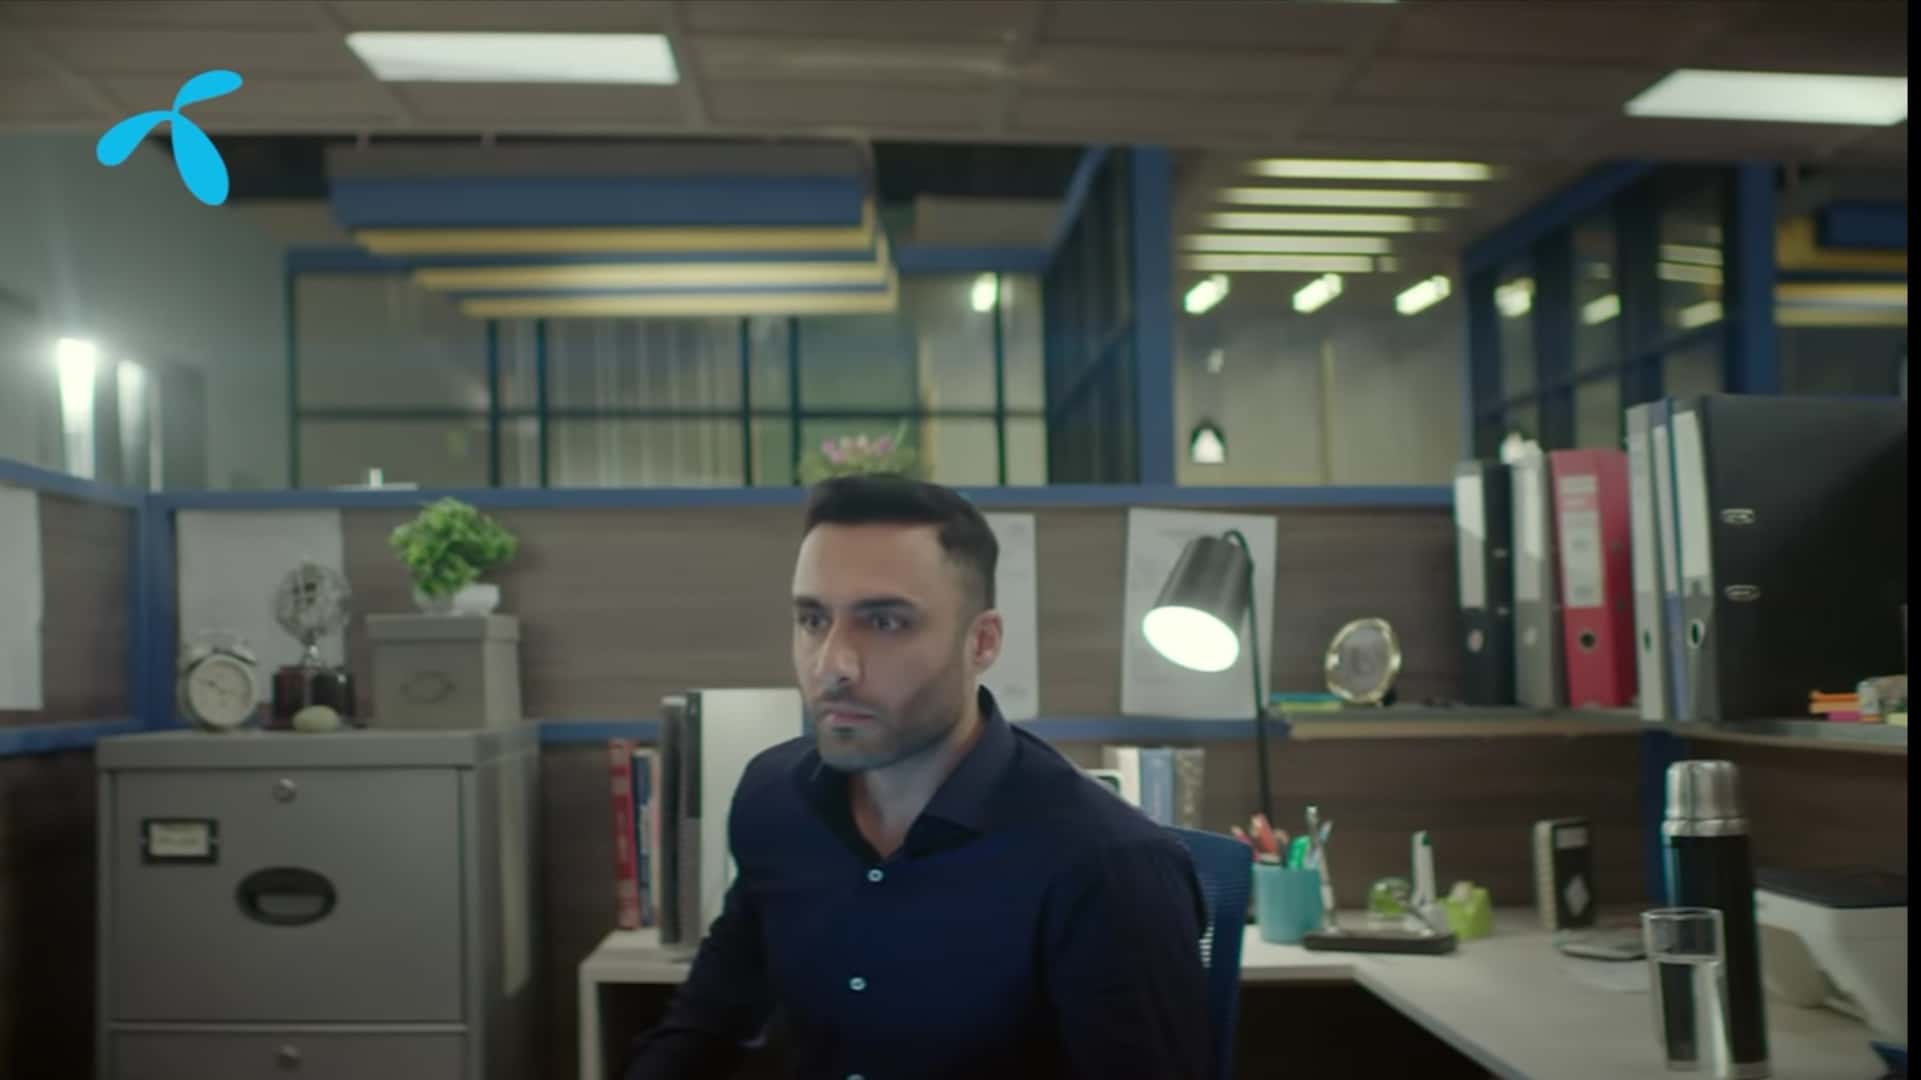 Is Telenor’s New Commercial a Blatant Copy of an Old Saudi Ad, Besides Being Cringe-Worthy?